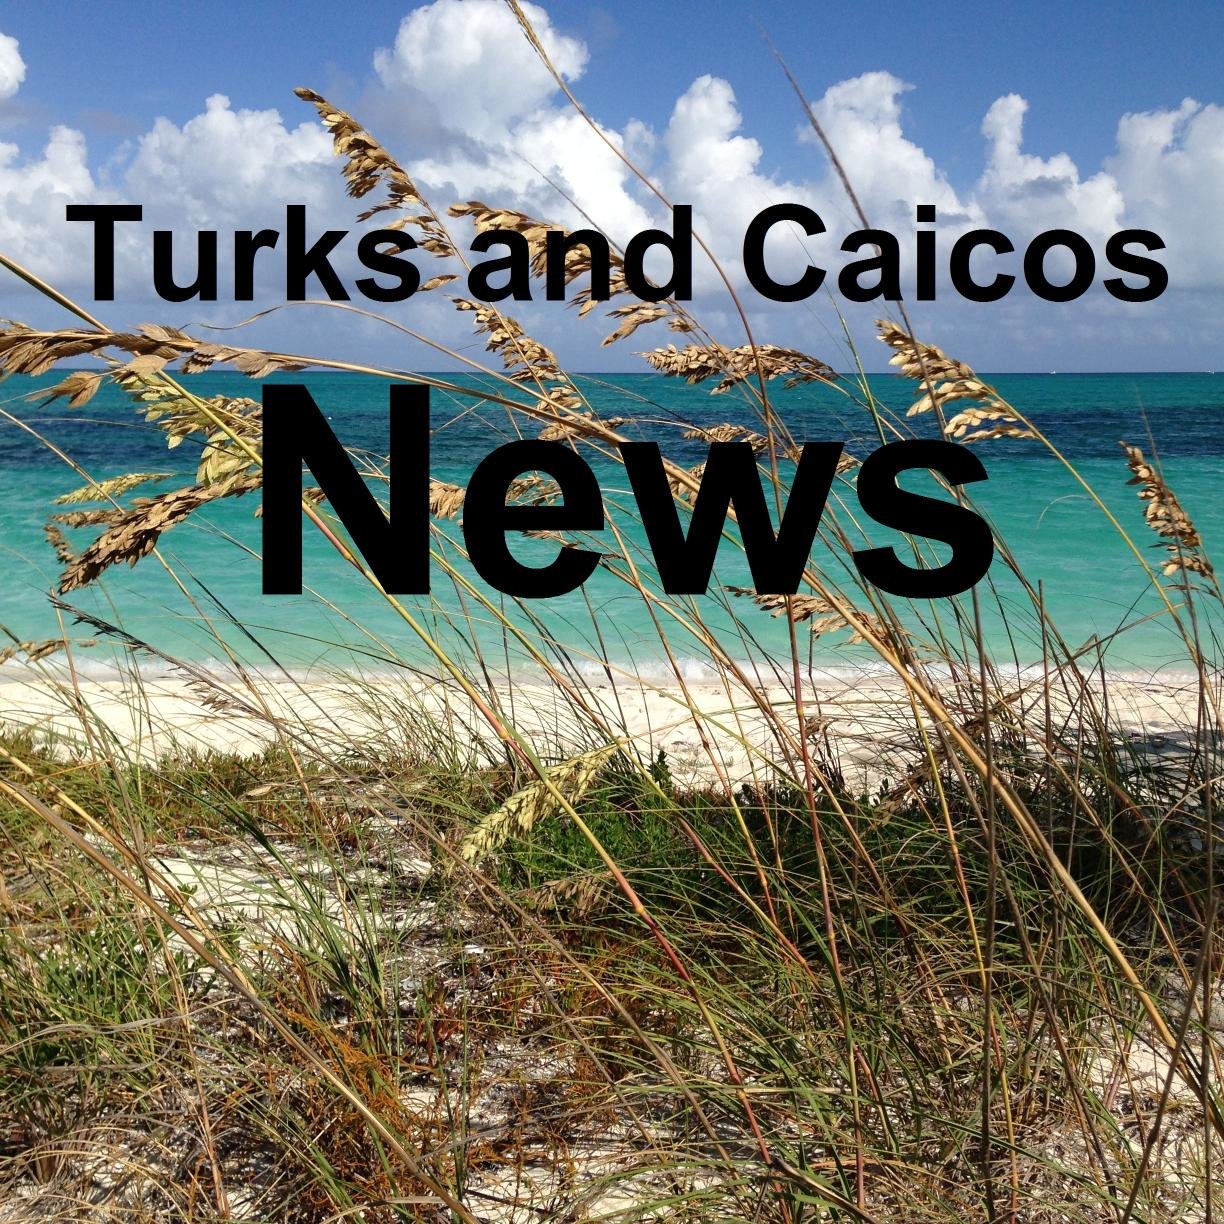 News and events in the Turks and Caicos Islands - 2 groups of islands in the Lucayan Archipelago and part of the Antilles islands. Photos copyright protected.